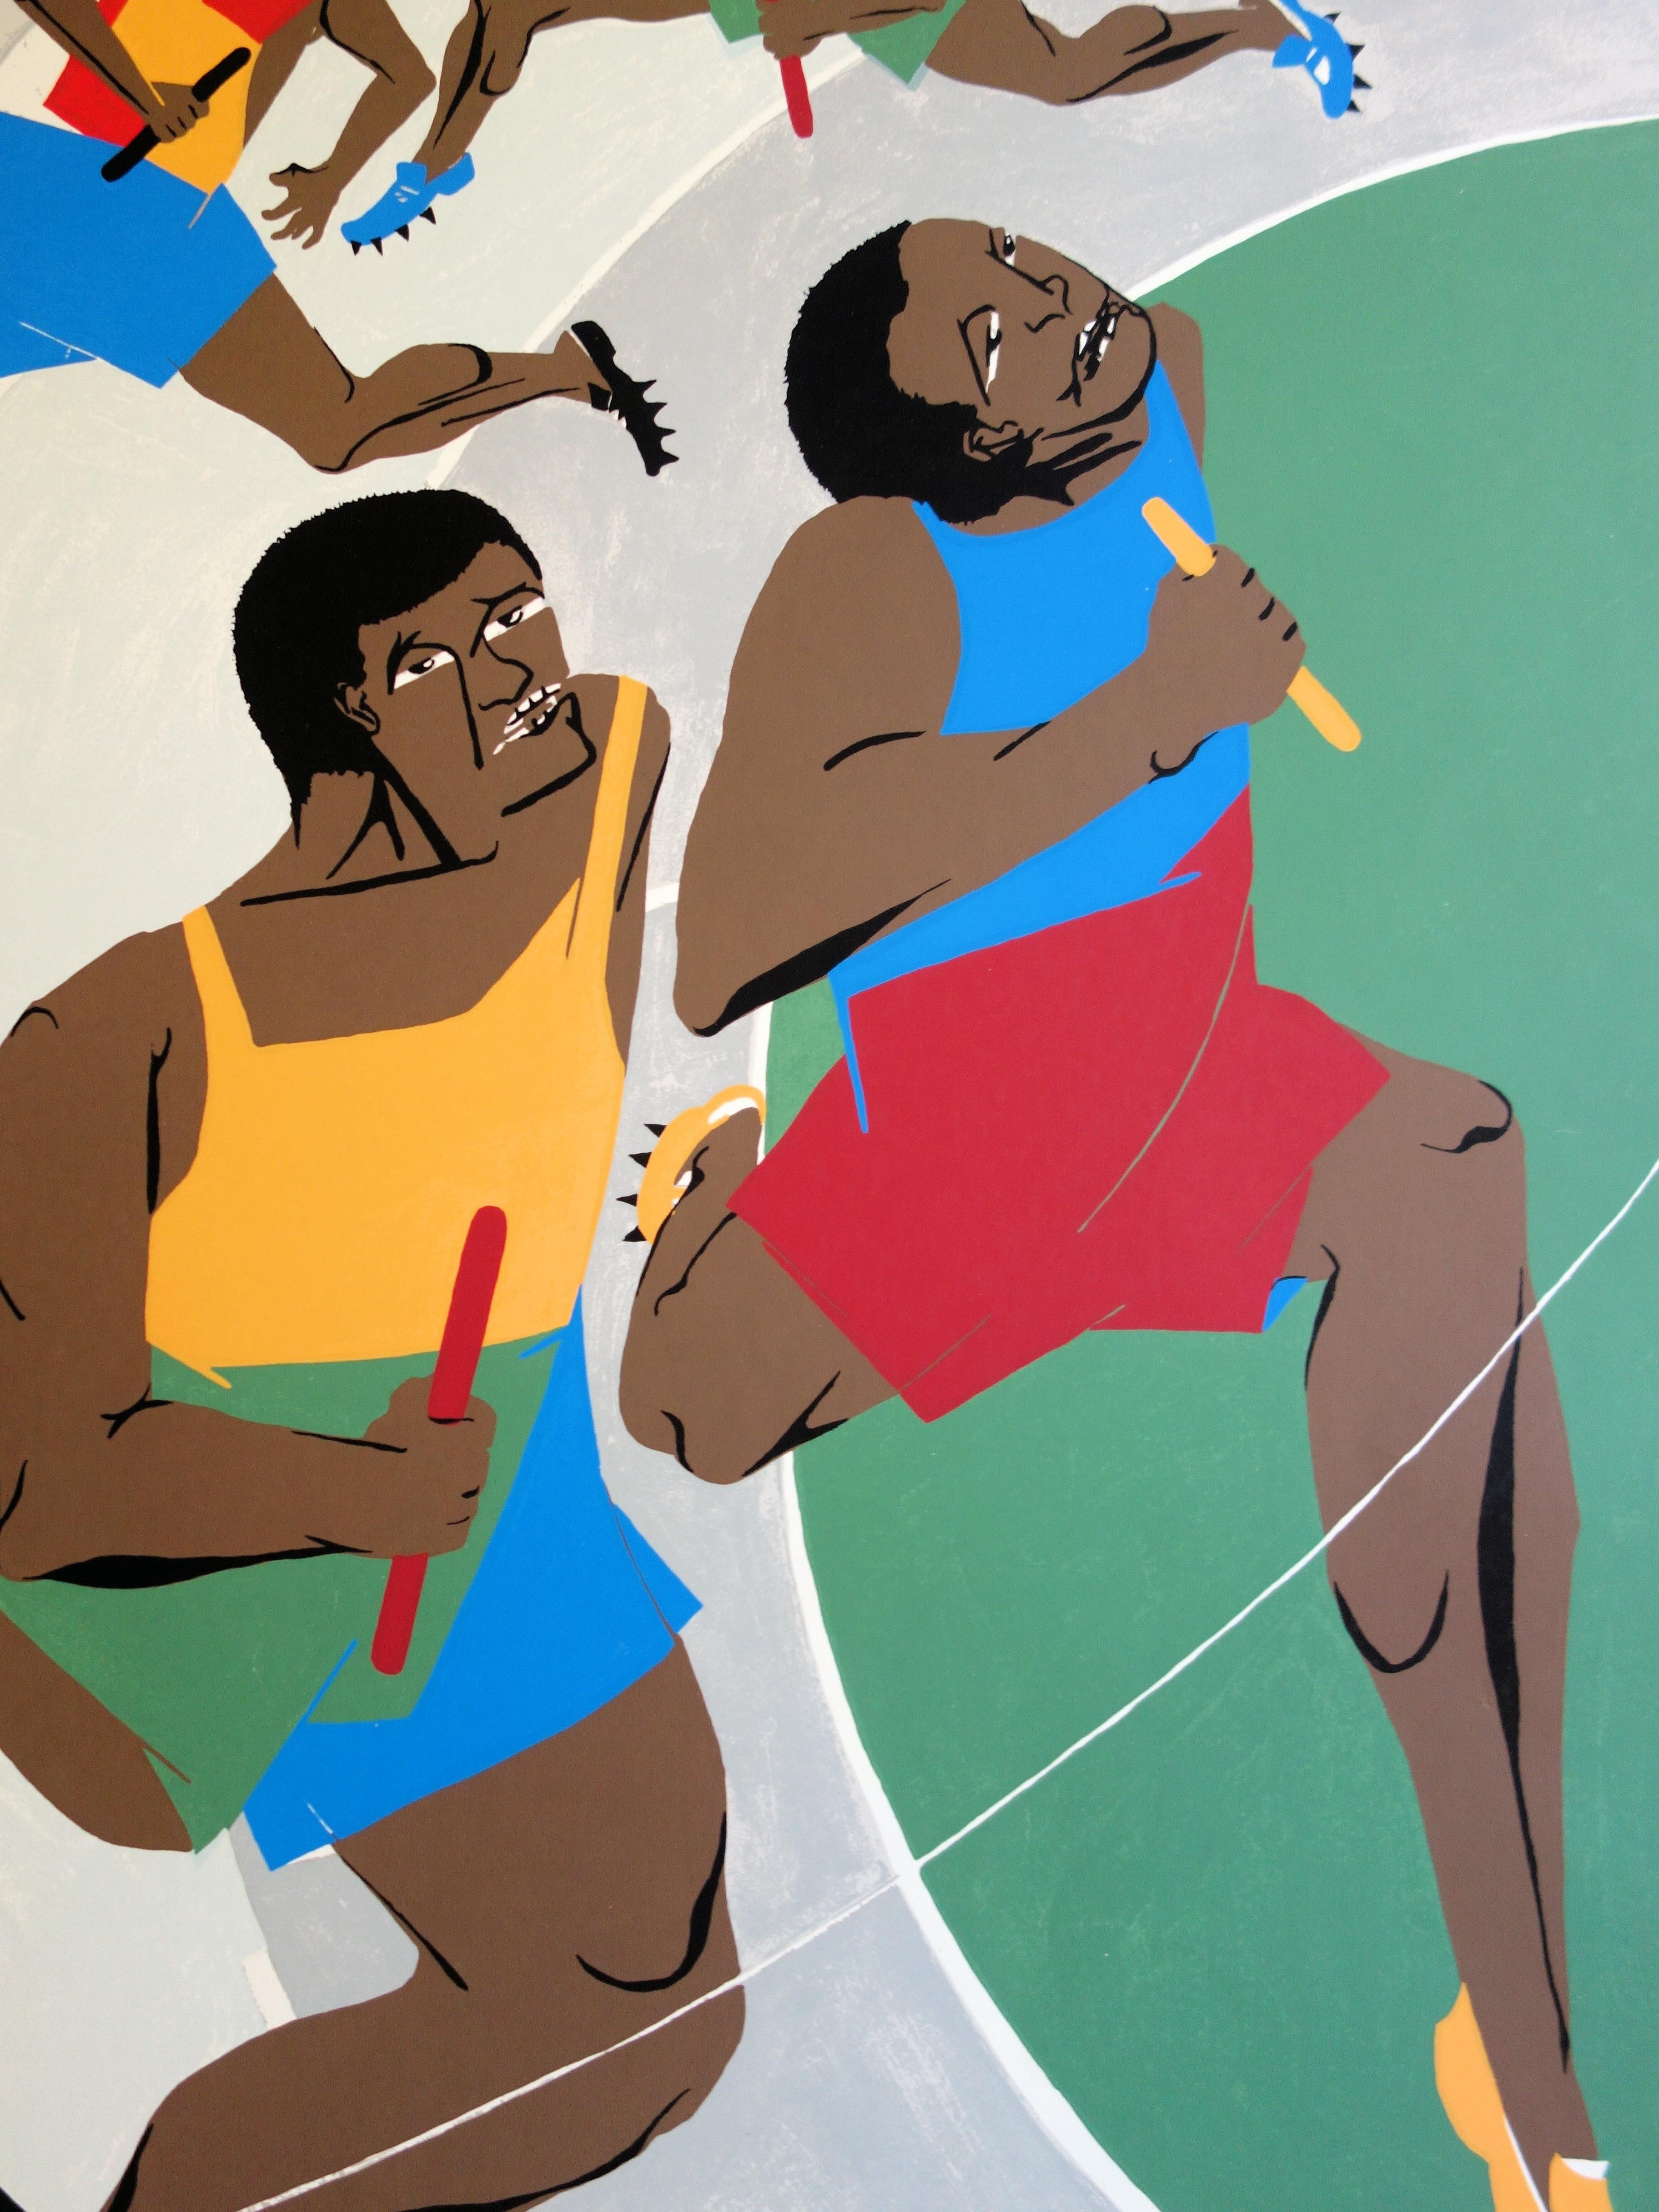 Jacob Lawrence
The Relay Race: Passing the Baton

Lithograph poster
Signature printed in the plate
On heavy paper 101 x 64 cm (c. 40 x 26 inch)
Made for the Olympic Games in Munich, 1972
Edition of Unknown Size

Very good condition, light defects at